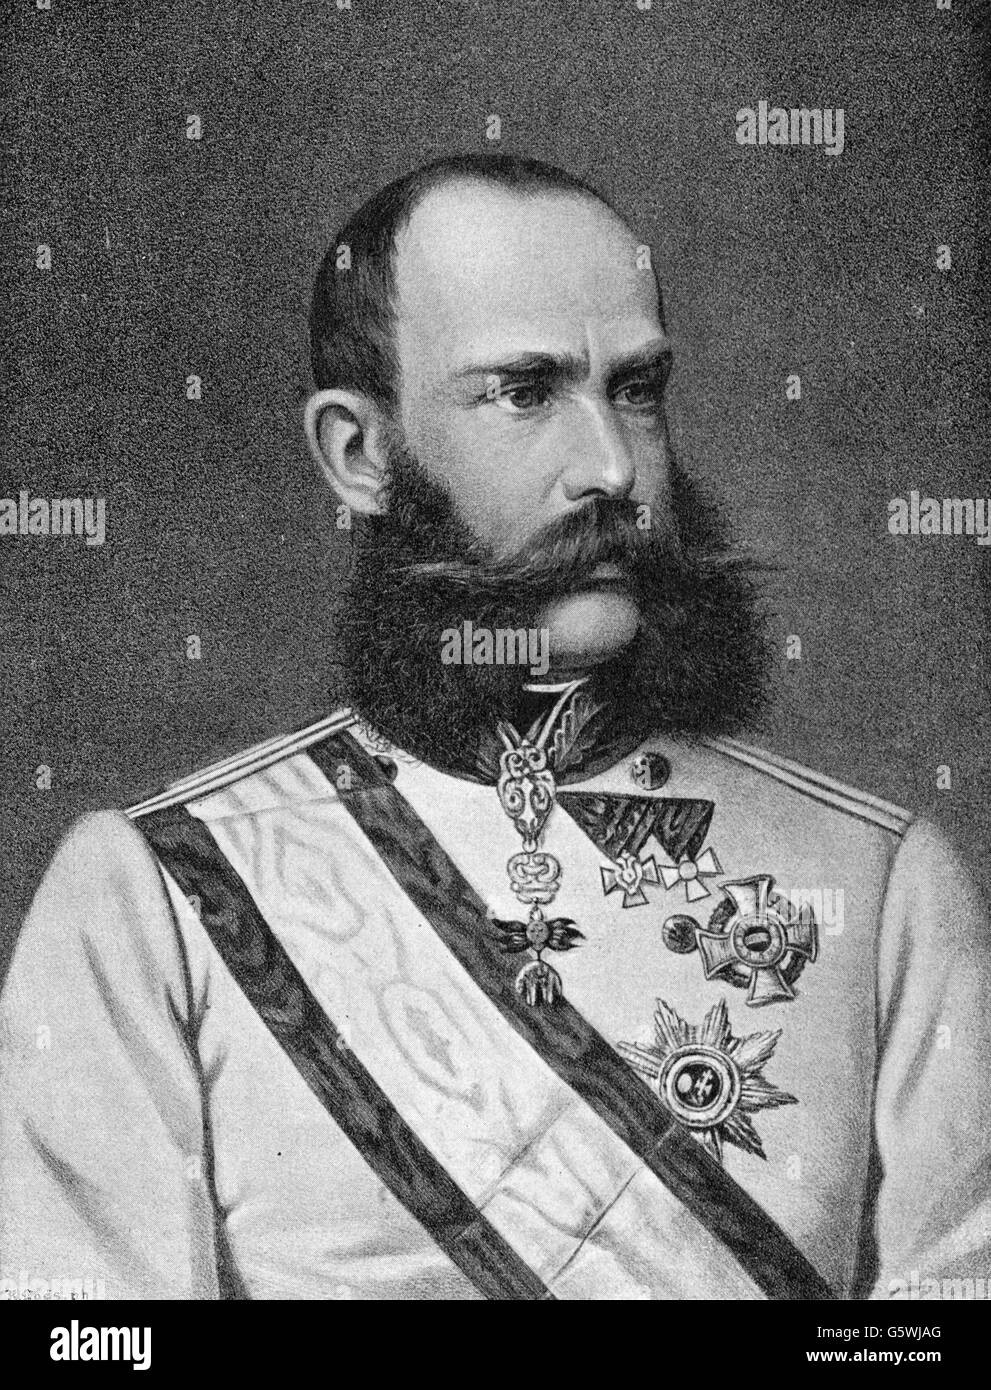 Franz Joseph I, 18.8.1830 - 21.11.1916, Emperor of Austria 2.12.1848 - 21.11.1916, portrait, print after painting, circa 1870, Artist's Copyright has not to be cleared Stock Photo